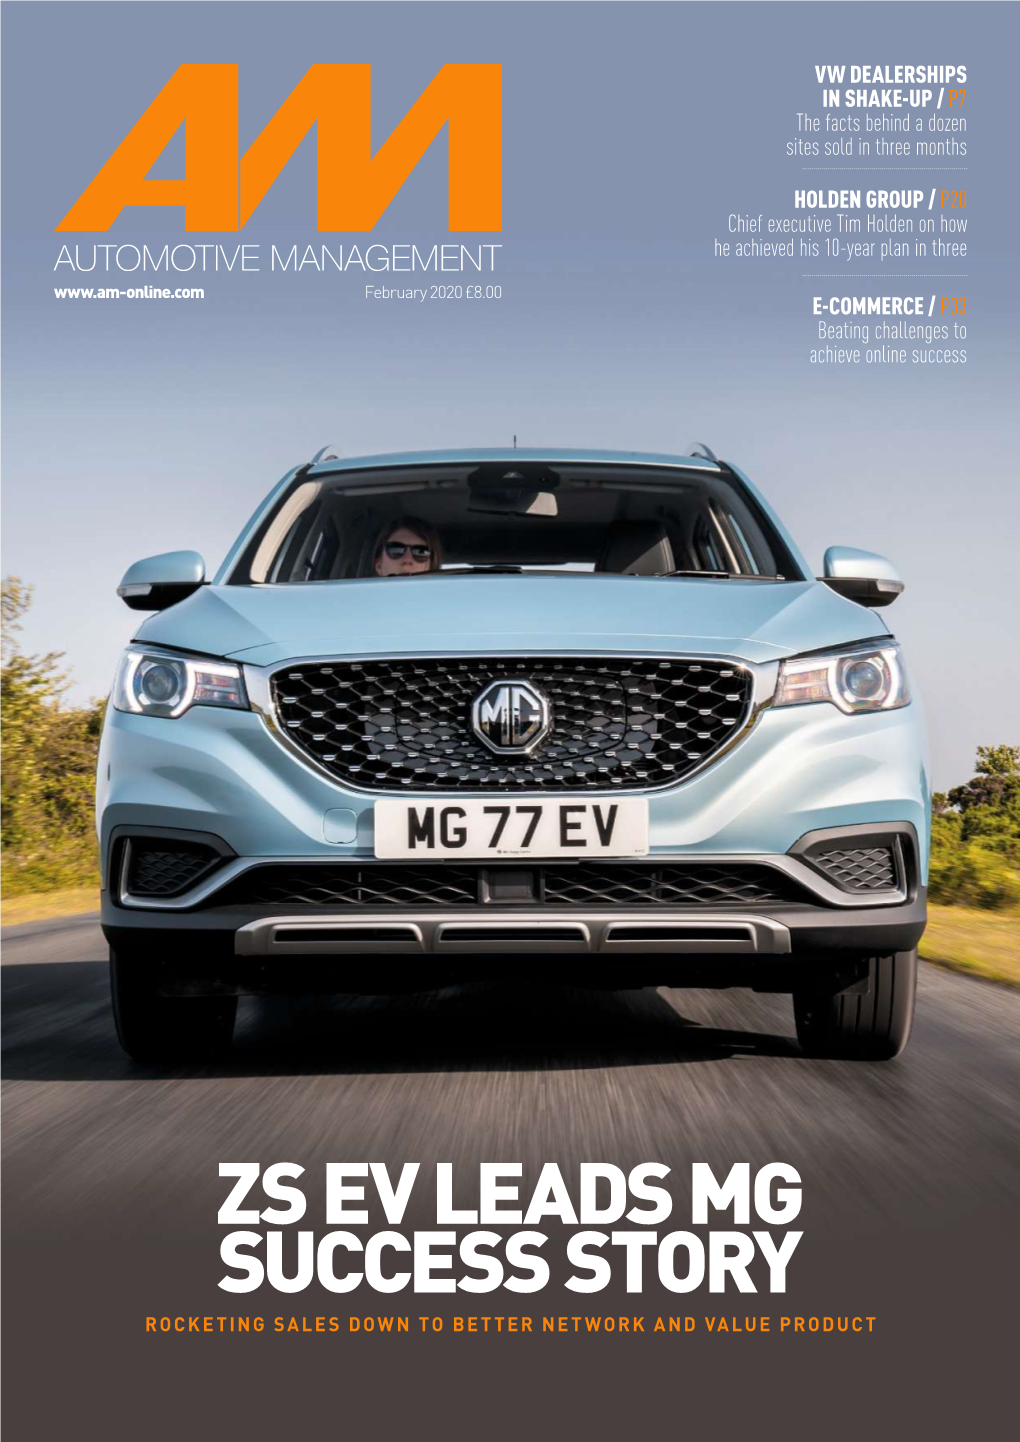 ZS EV LEADS MG SUCCESS STORY ROCKETING SALES DOWN to BETTER NETWORK and VALUE PRODUCT Adrocket